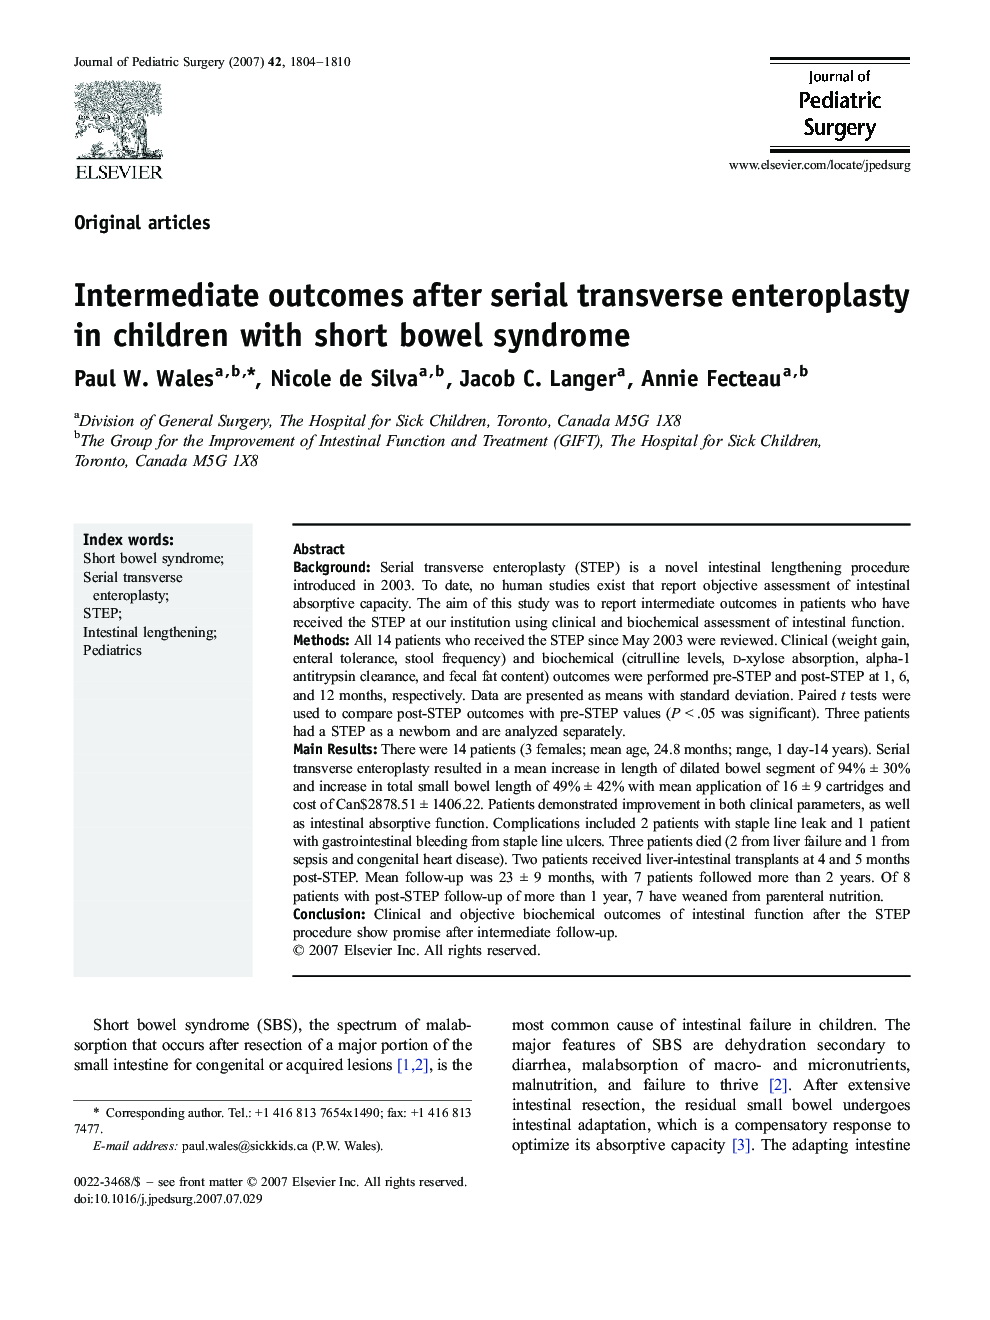 Intermediate outcomes after serial transverse enteroplasty in children with short bowel syndrome